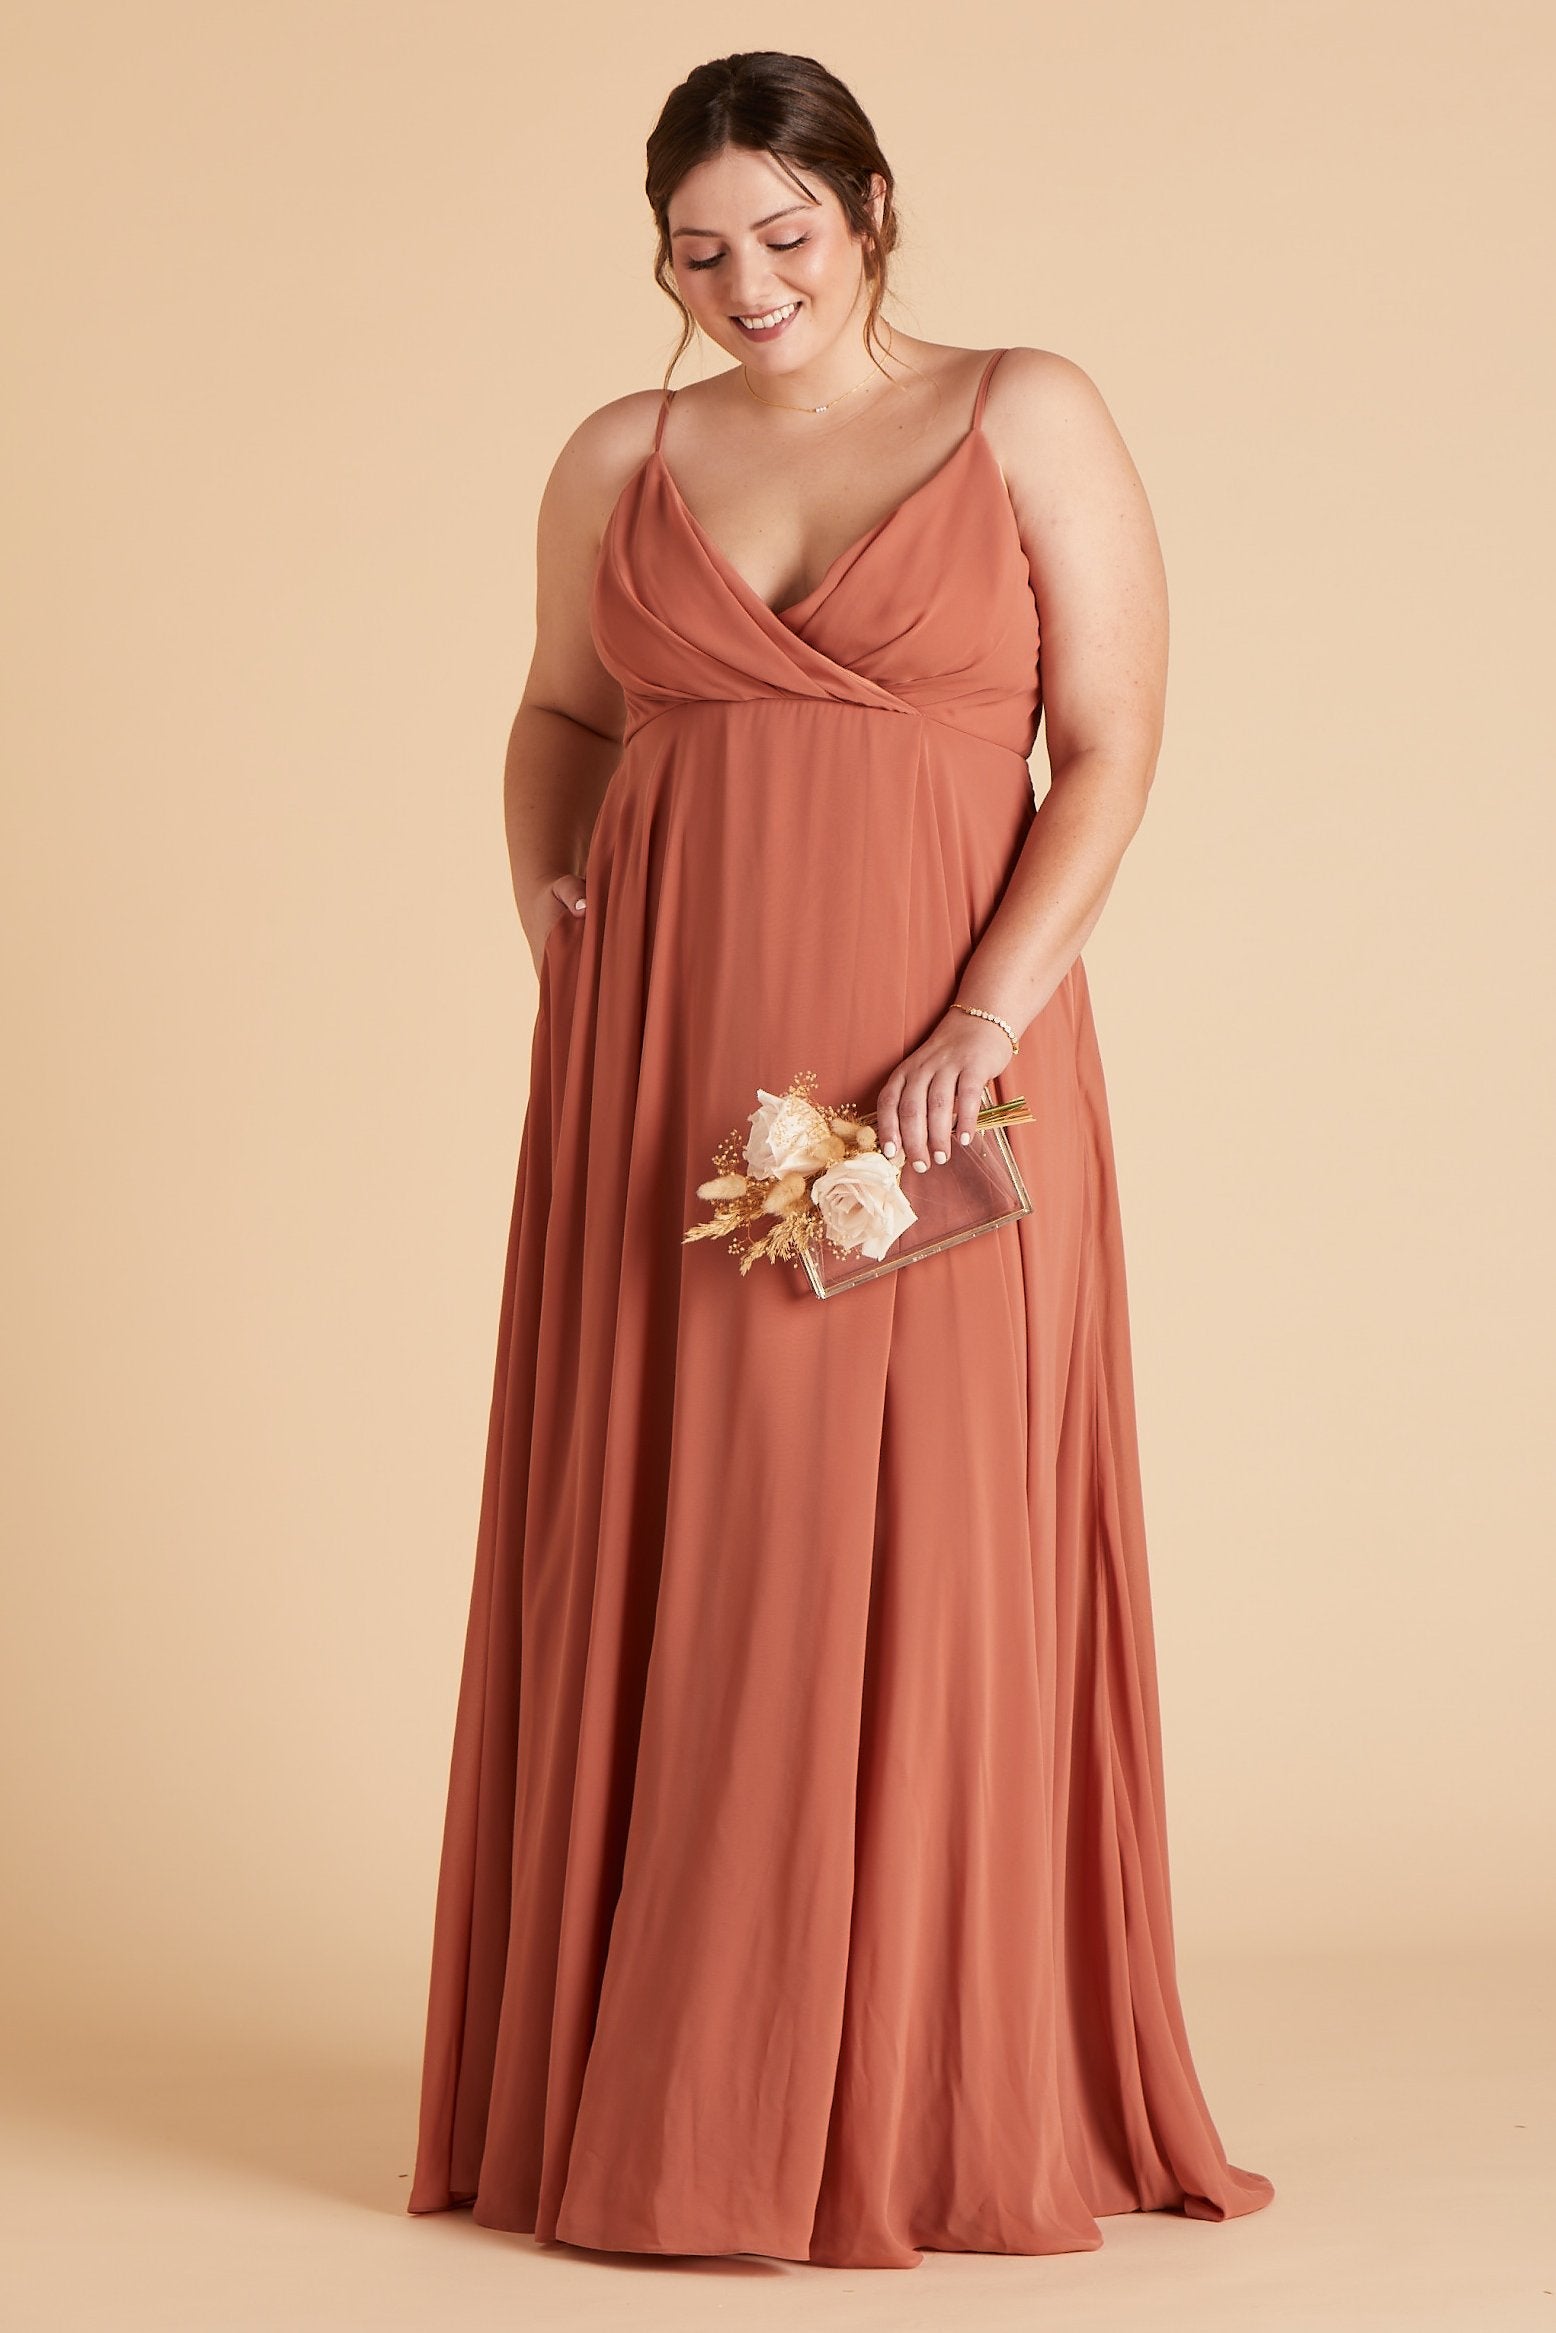 Back view of the Kaia Dress Curve in terracotta chiffon shows the hook and eye closure and hidden zipper in the center seam of the dress bodice and skirt.